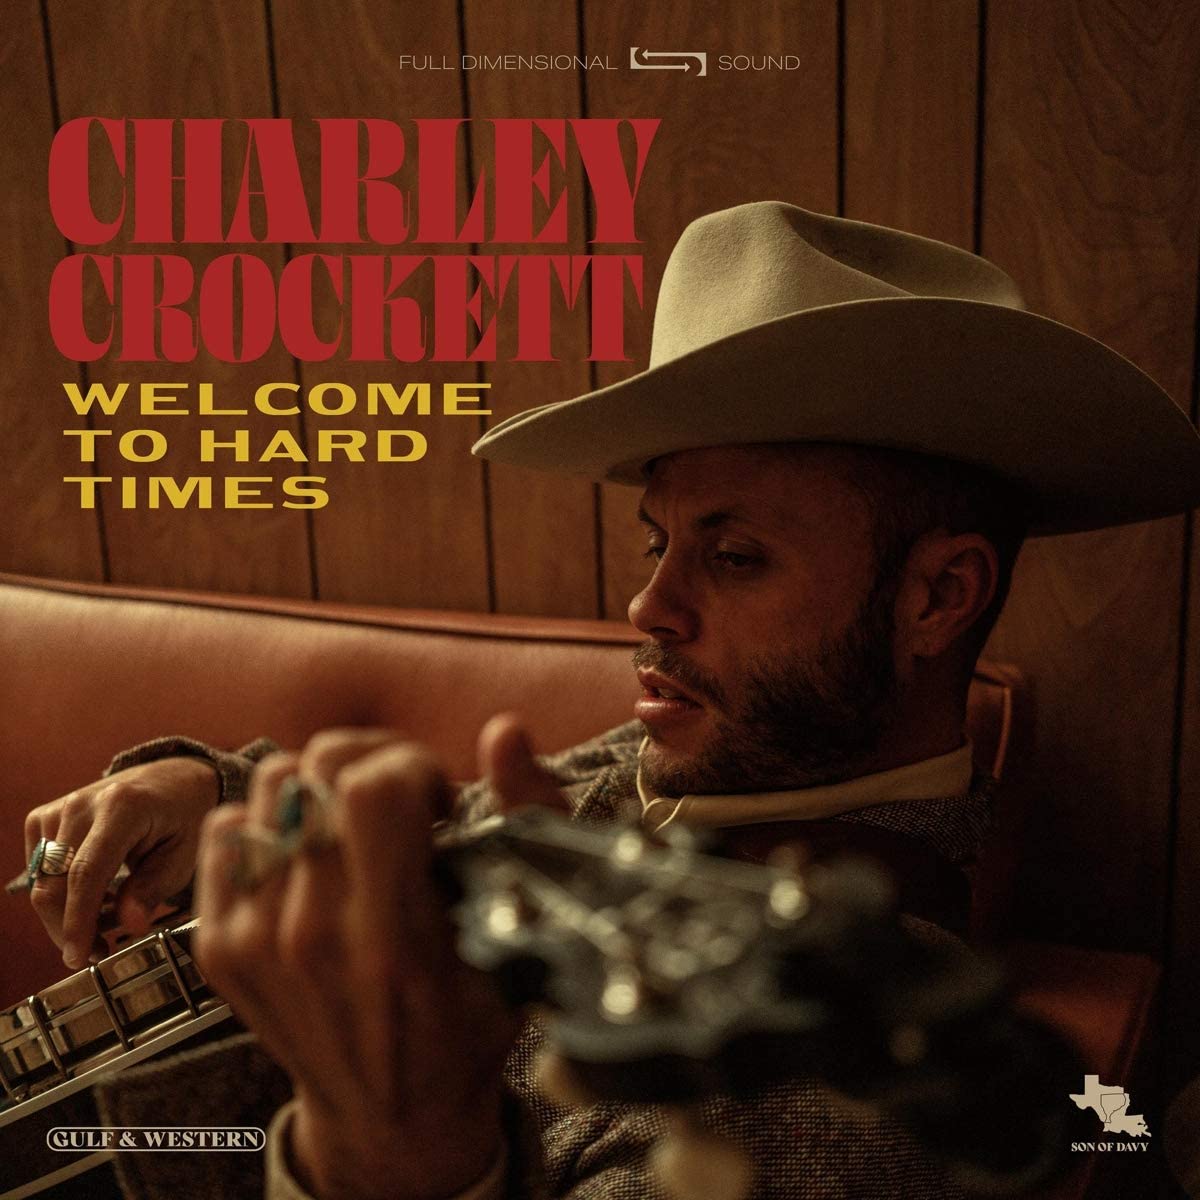 Crockett, Charley/Welcome To Hard Times [LP]